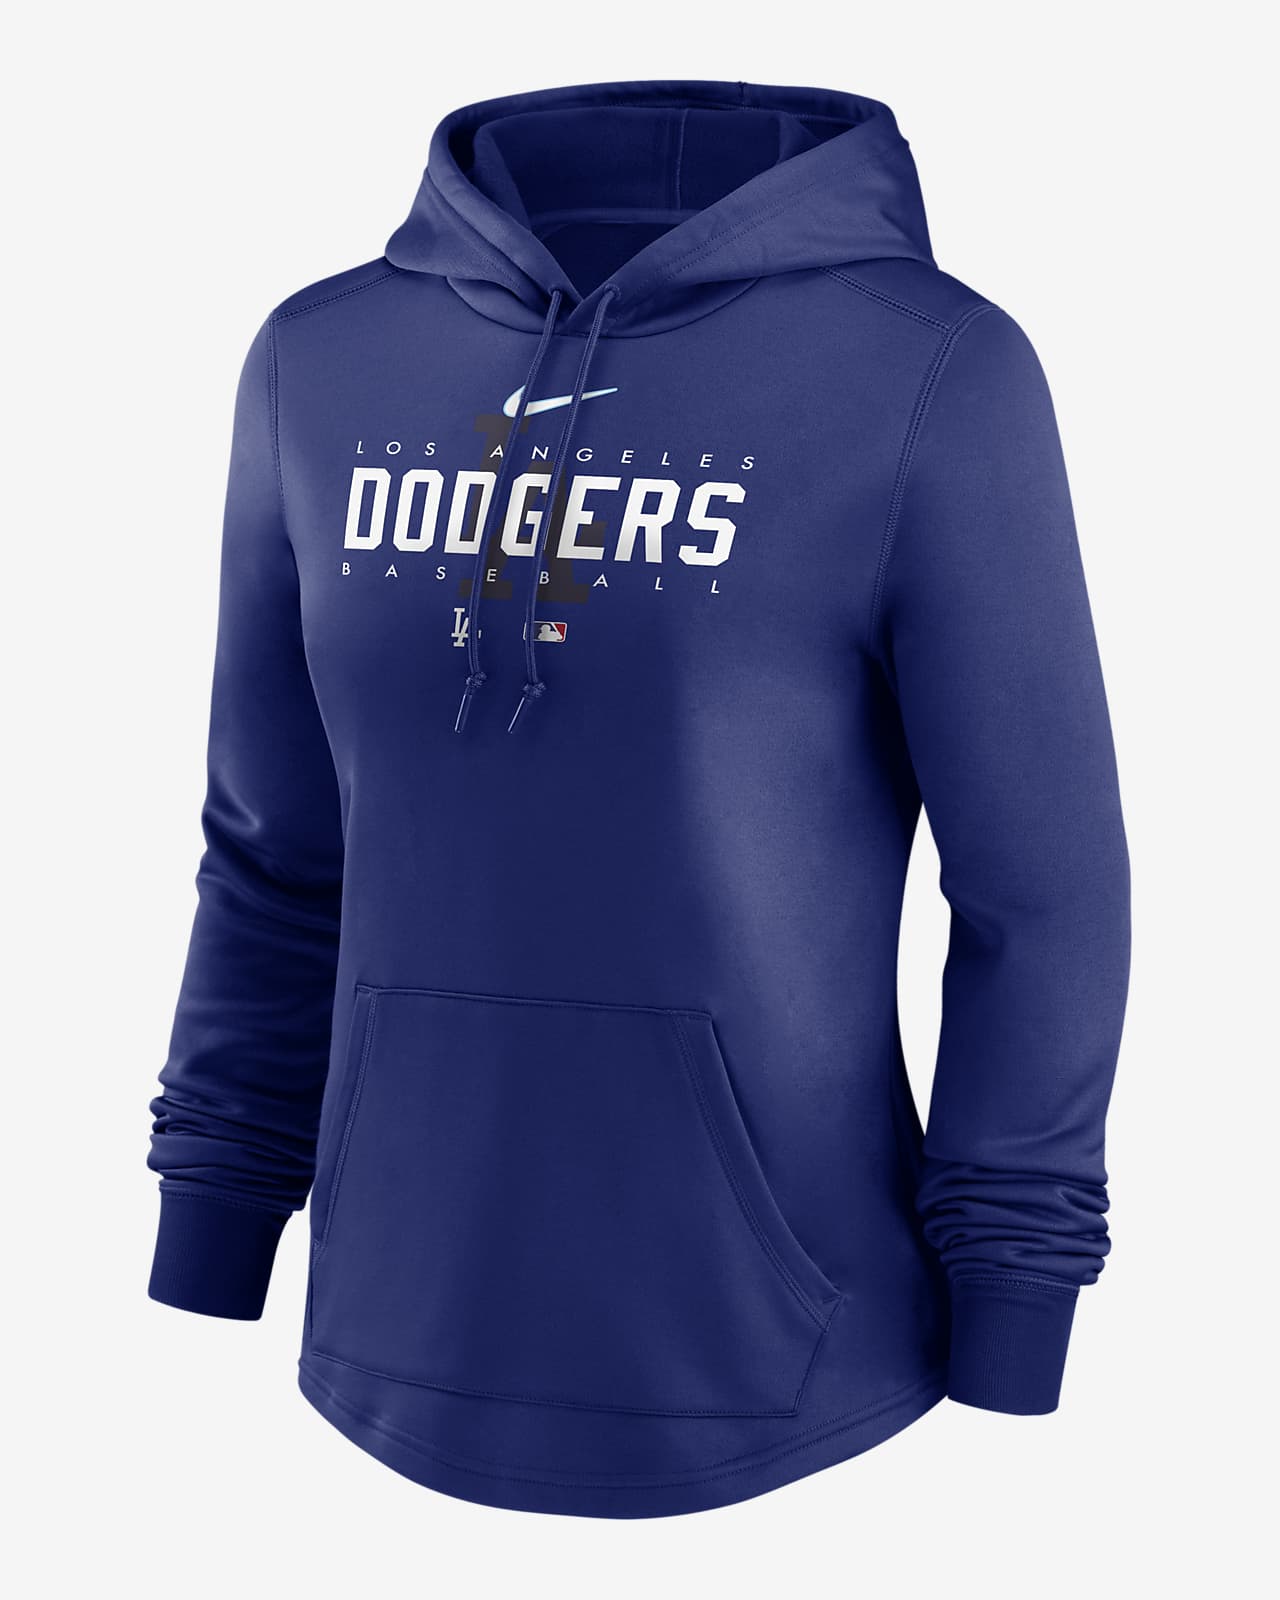 Nike Therma Pregame (MLB Los Angeles Dodgers) Women's Pullover Hoodie.